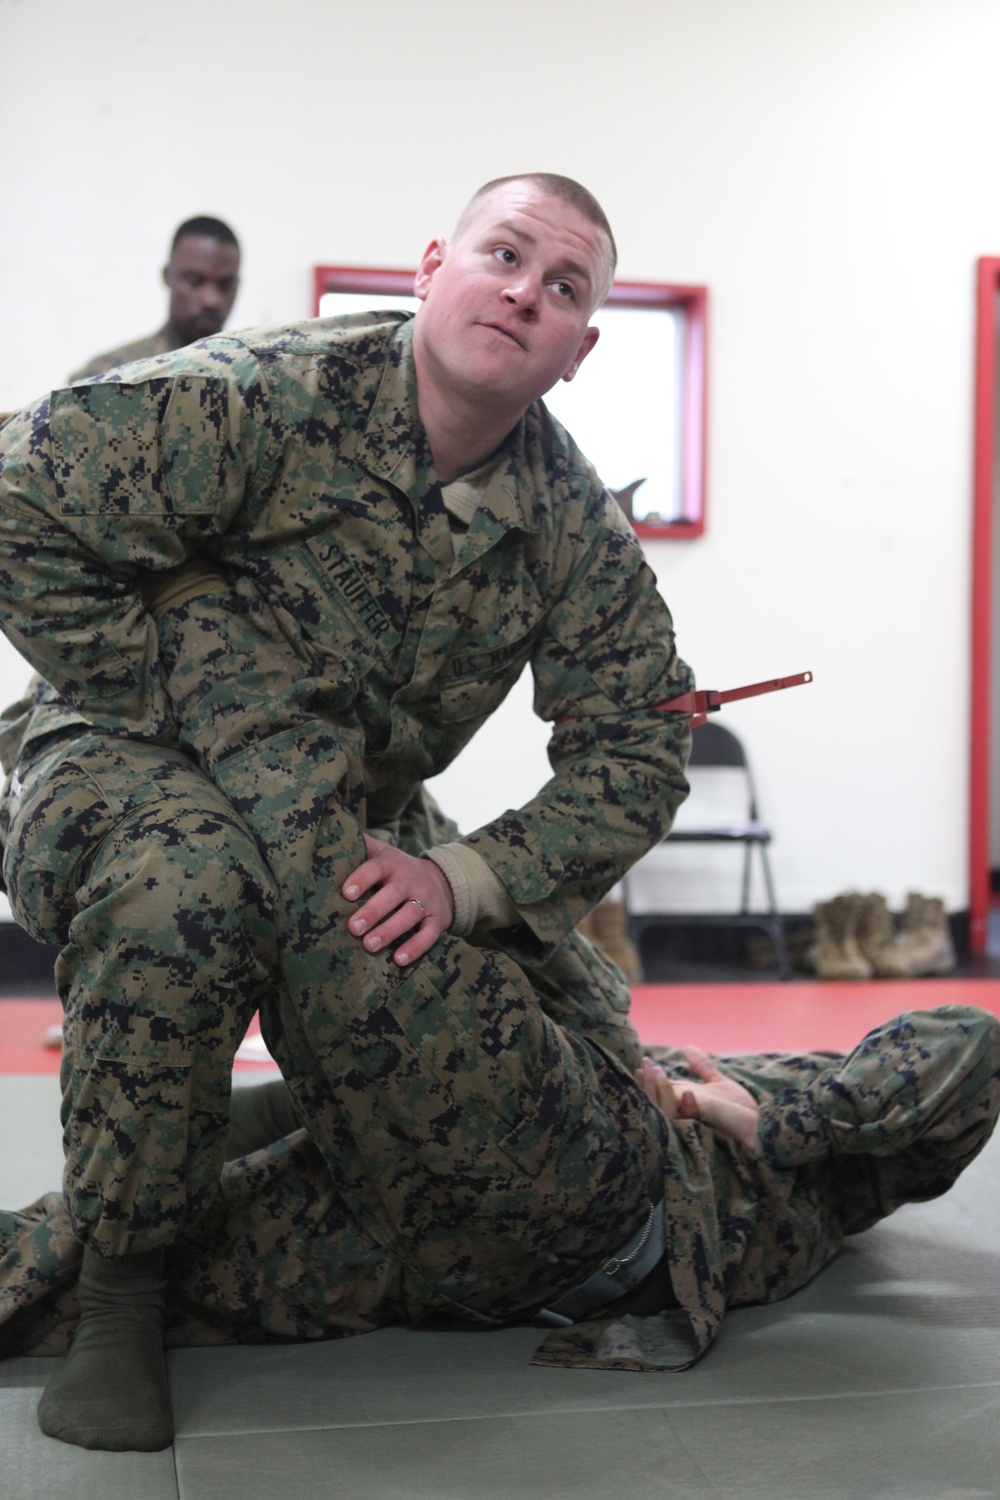 Marines learn to detain, hold enemy prisoners of war